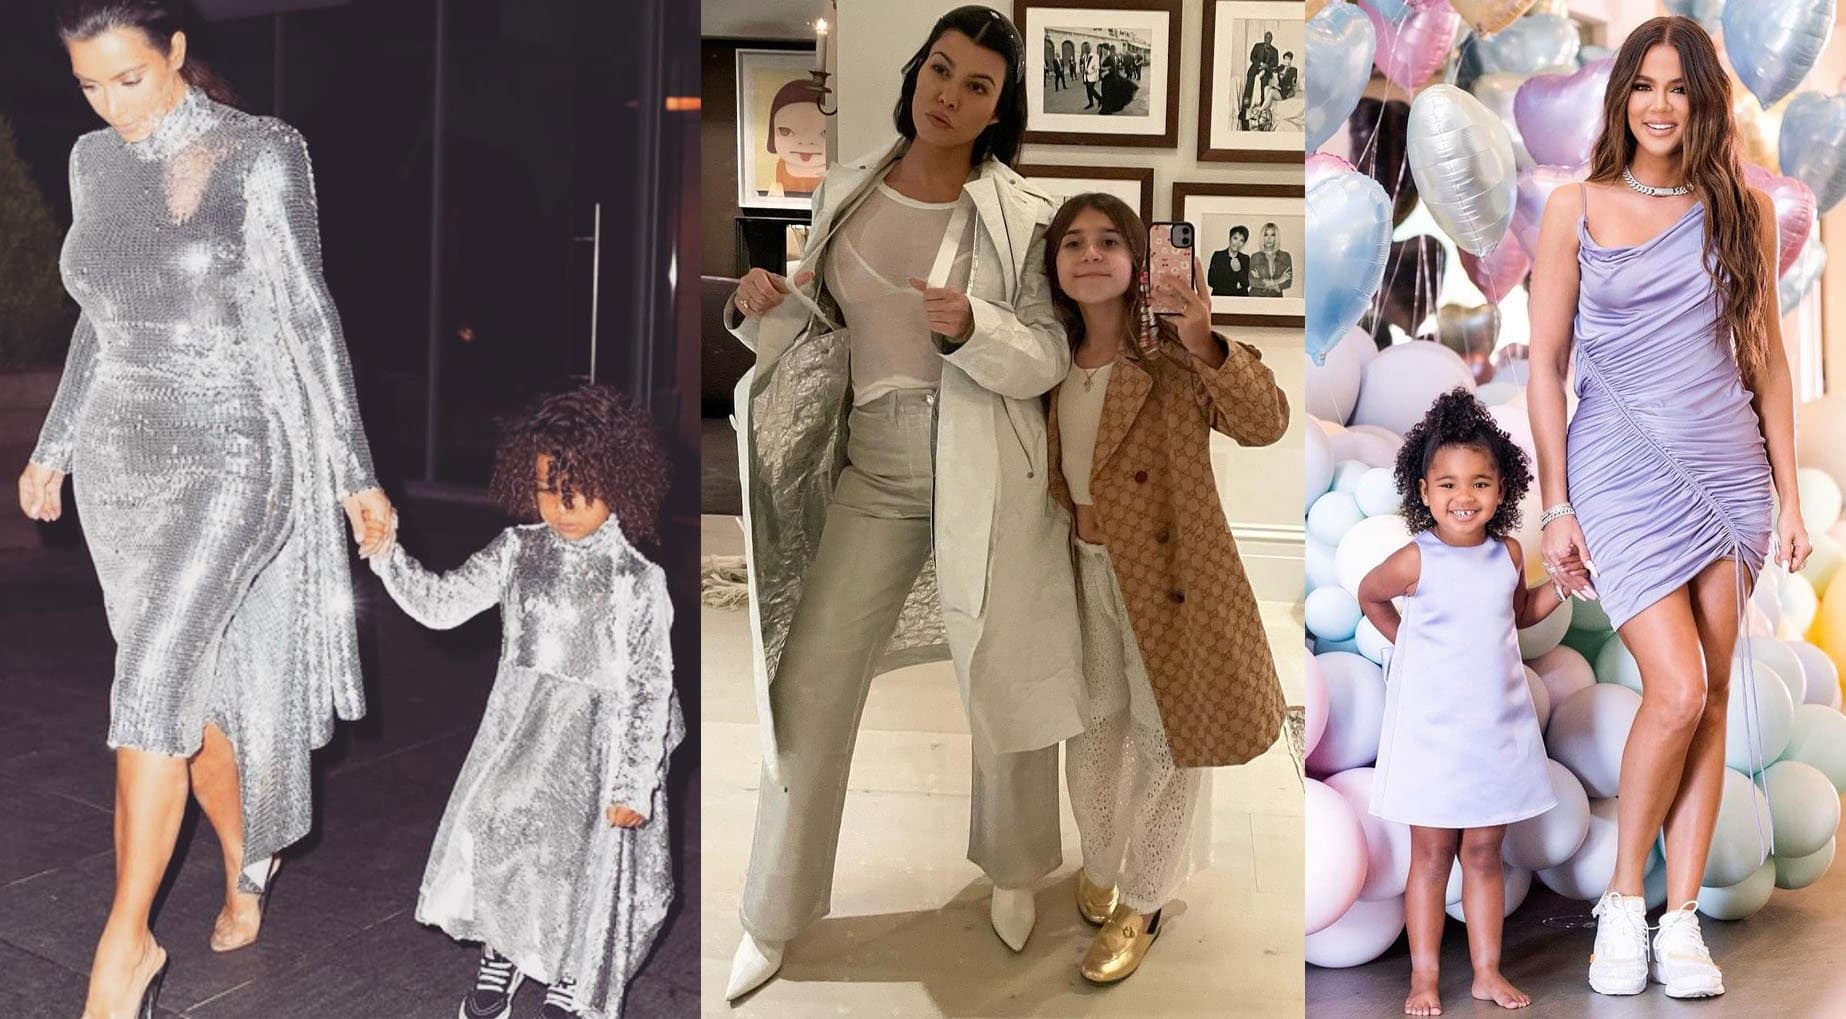 Kim, Kourtney, and Khloe Kardashian matching outfits with their mini-me North, Penelope, and True